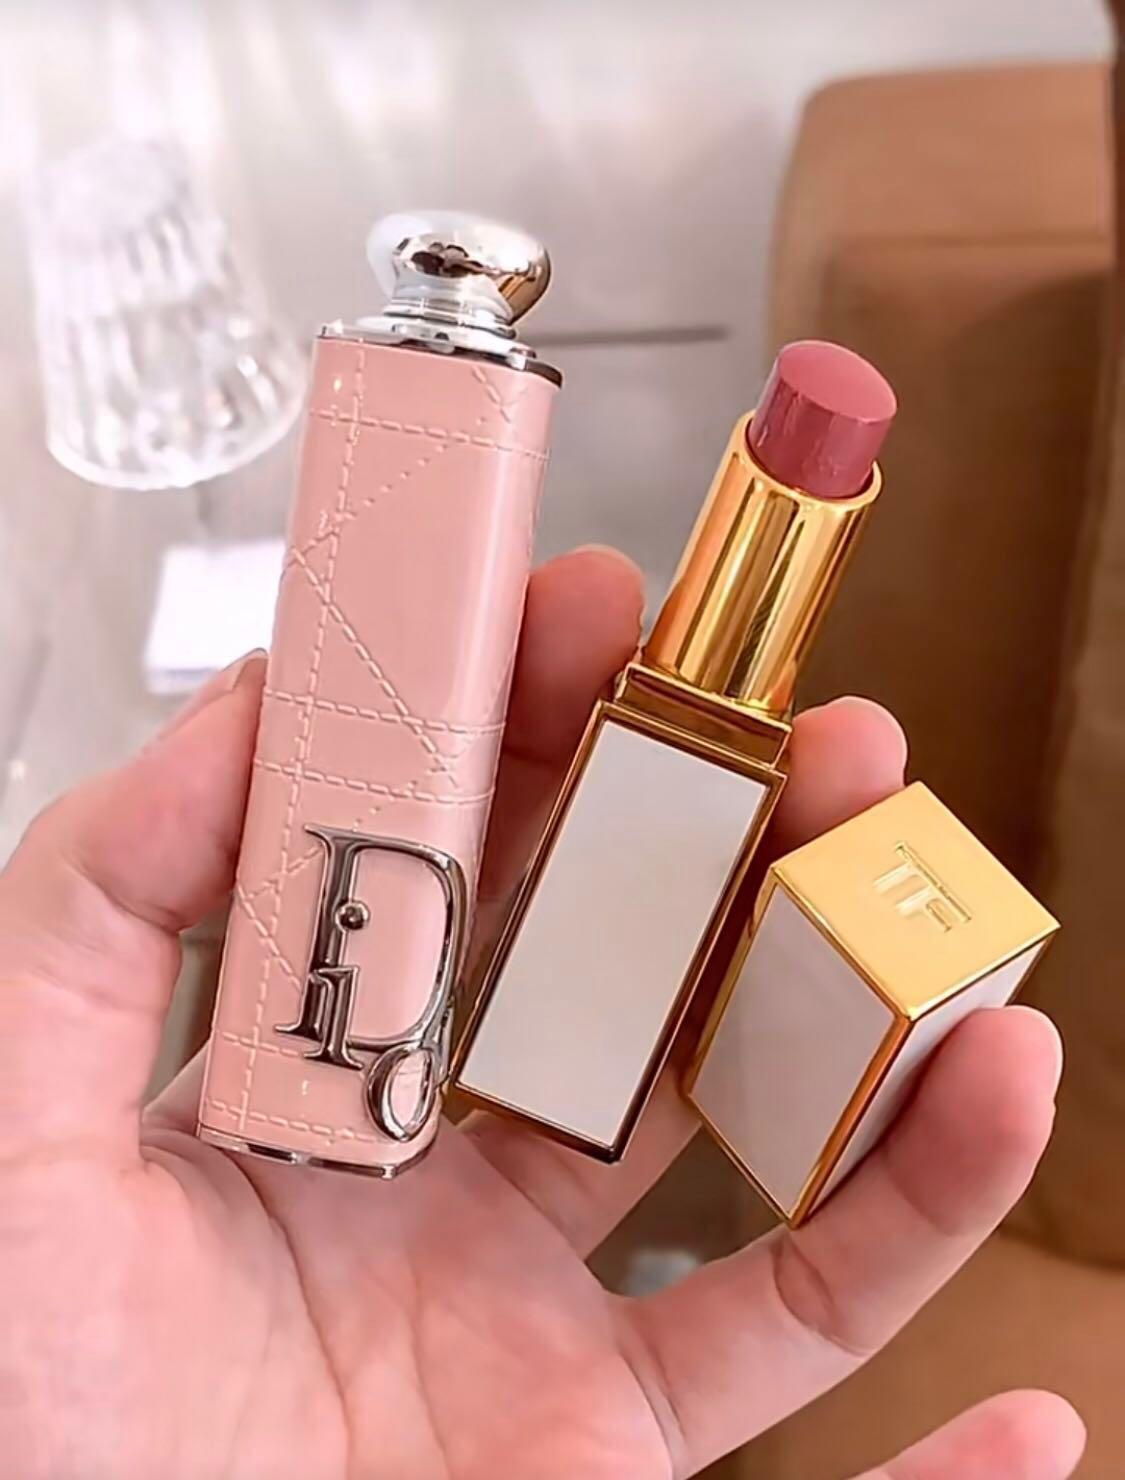 BRAND NEW DIOR ADDICT SHINE LIPSTICK 90 NATURAL ORIGIN REFILLABLE  LIPSTICK  720 ICONE Beauty  Personal Care Face Makeup on Carousell